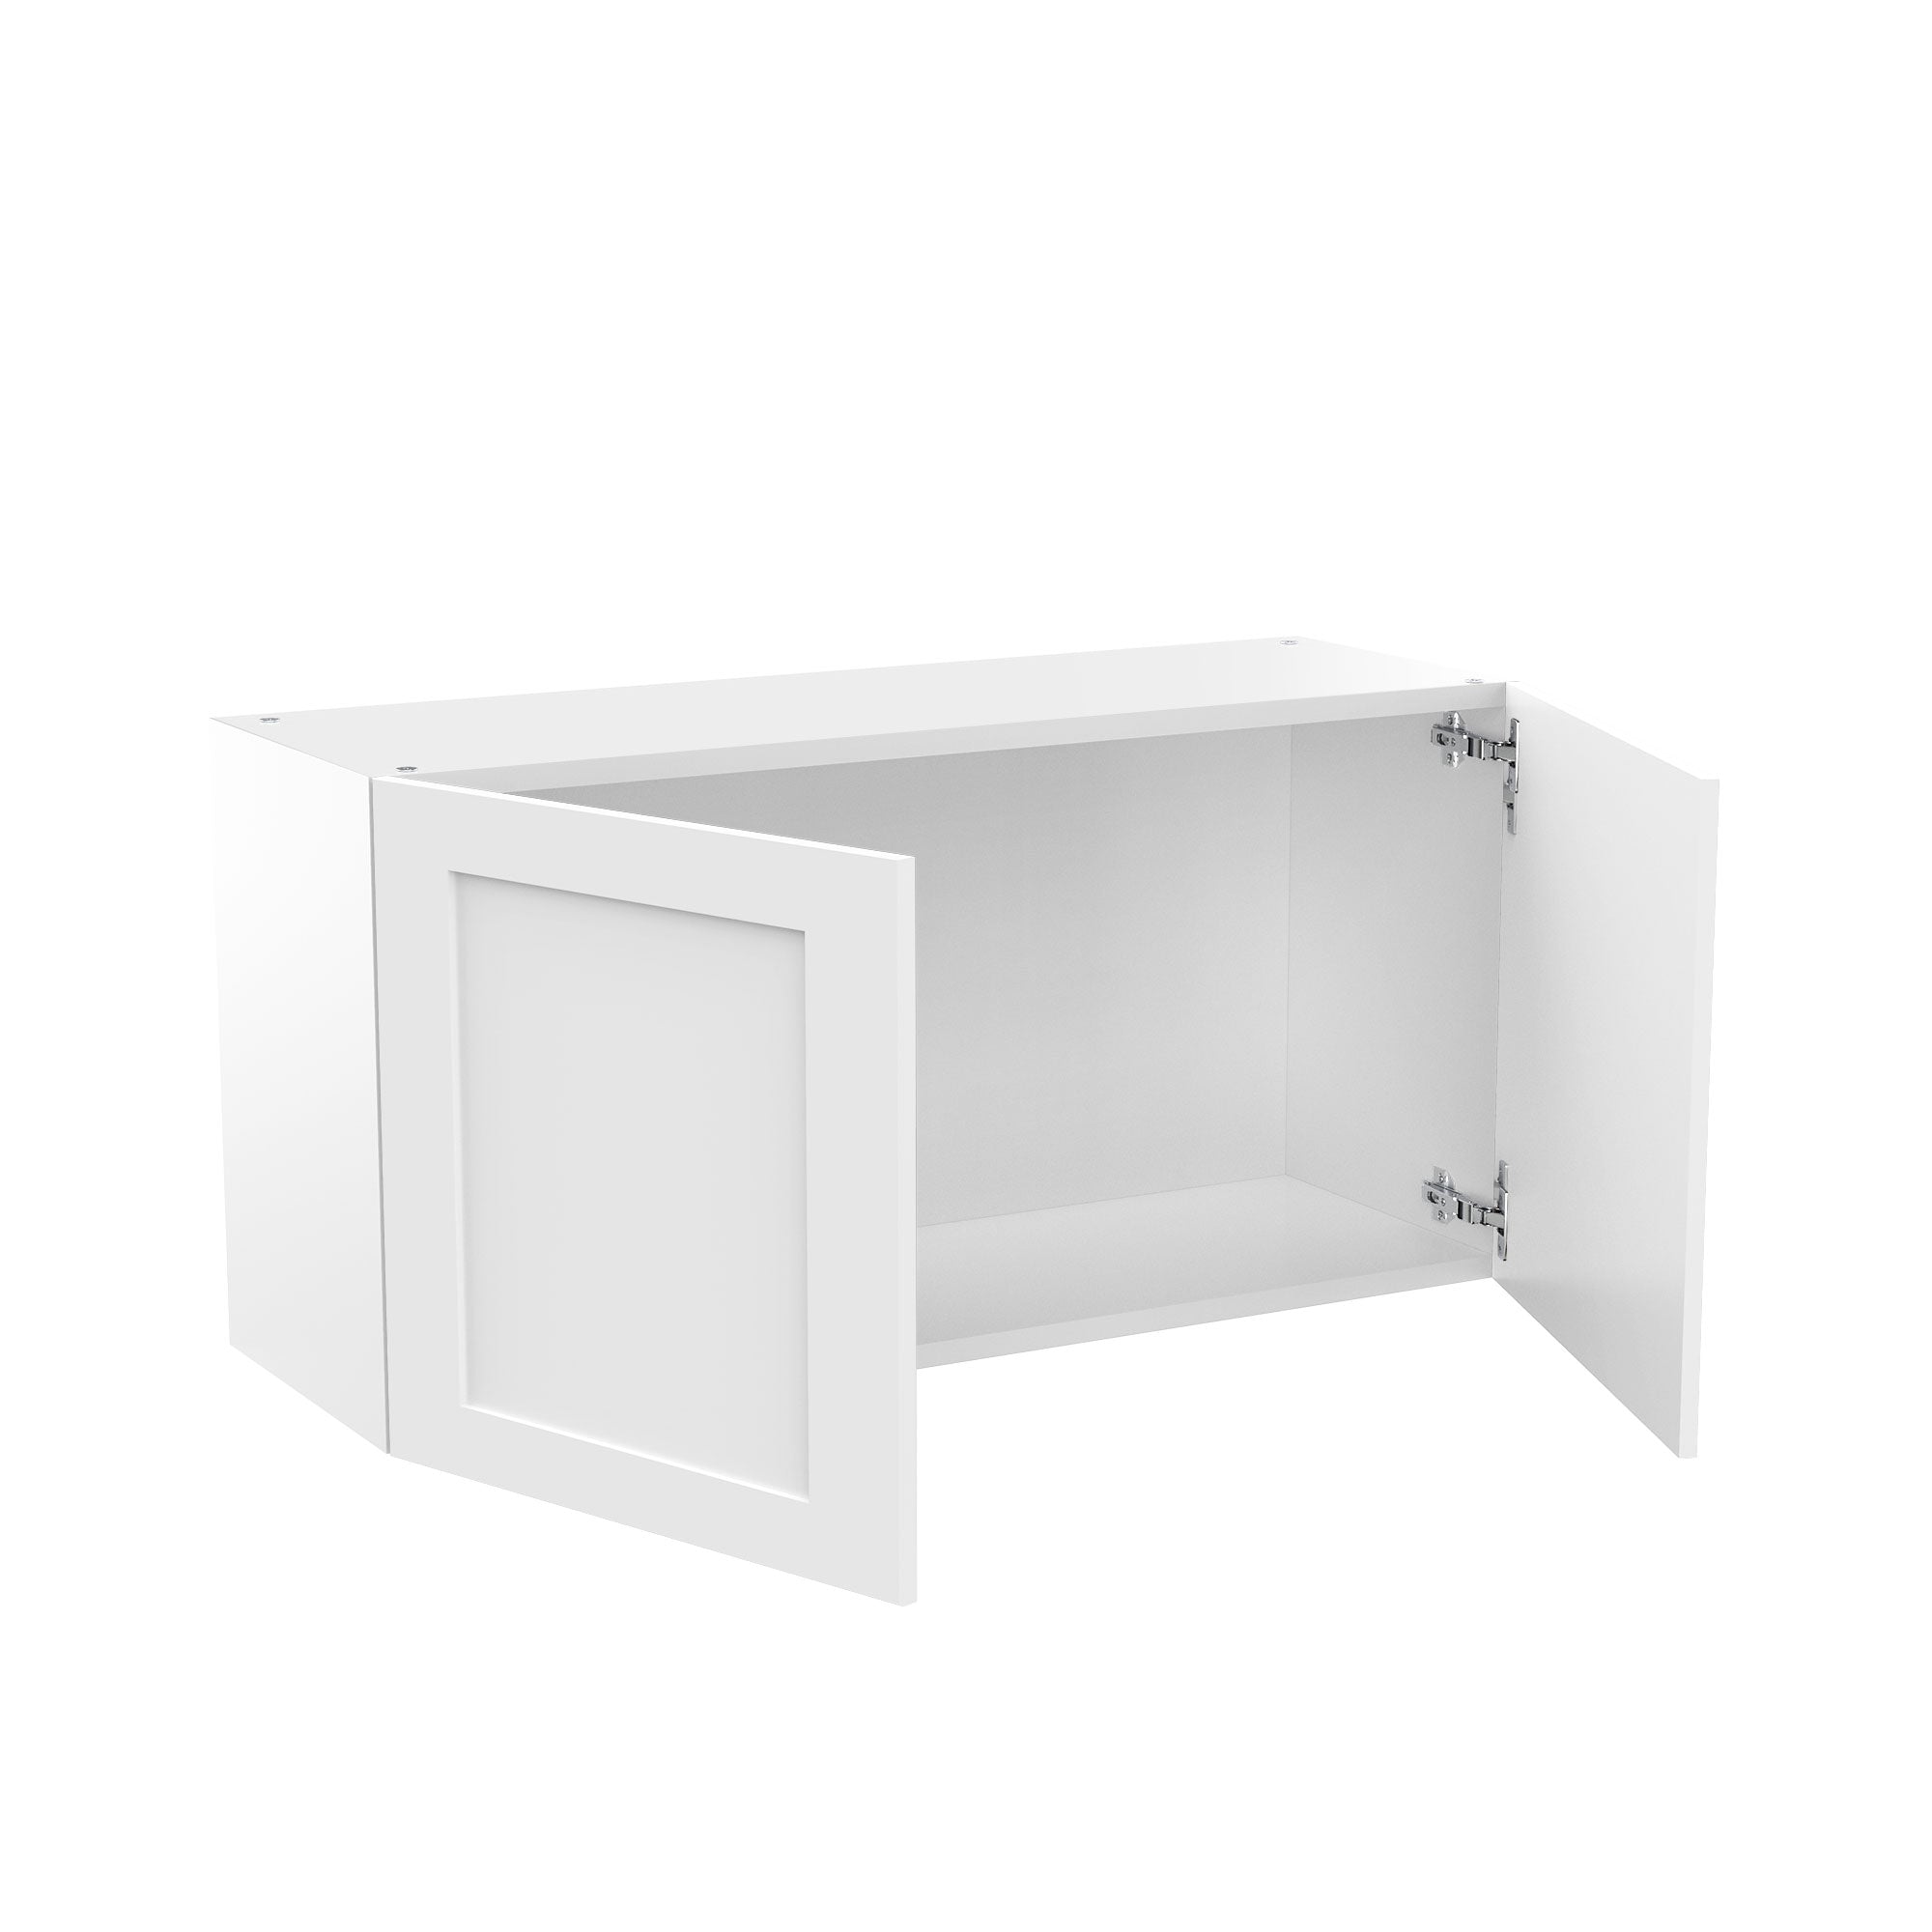 RTA - White Shaker - Double Door Wall Cabinets | 36"W x 18"H x 12"D